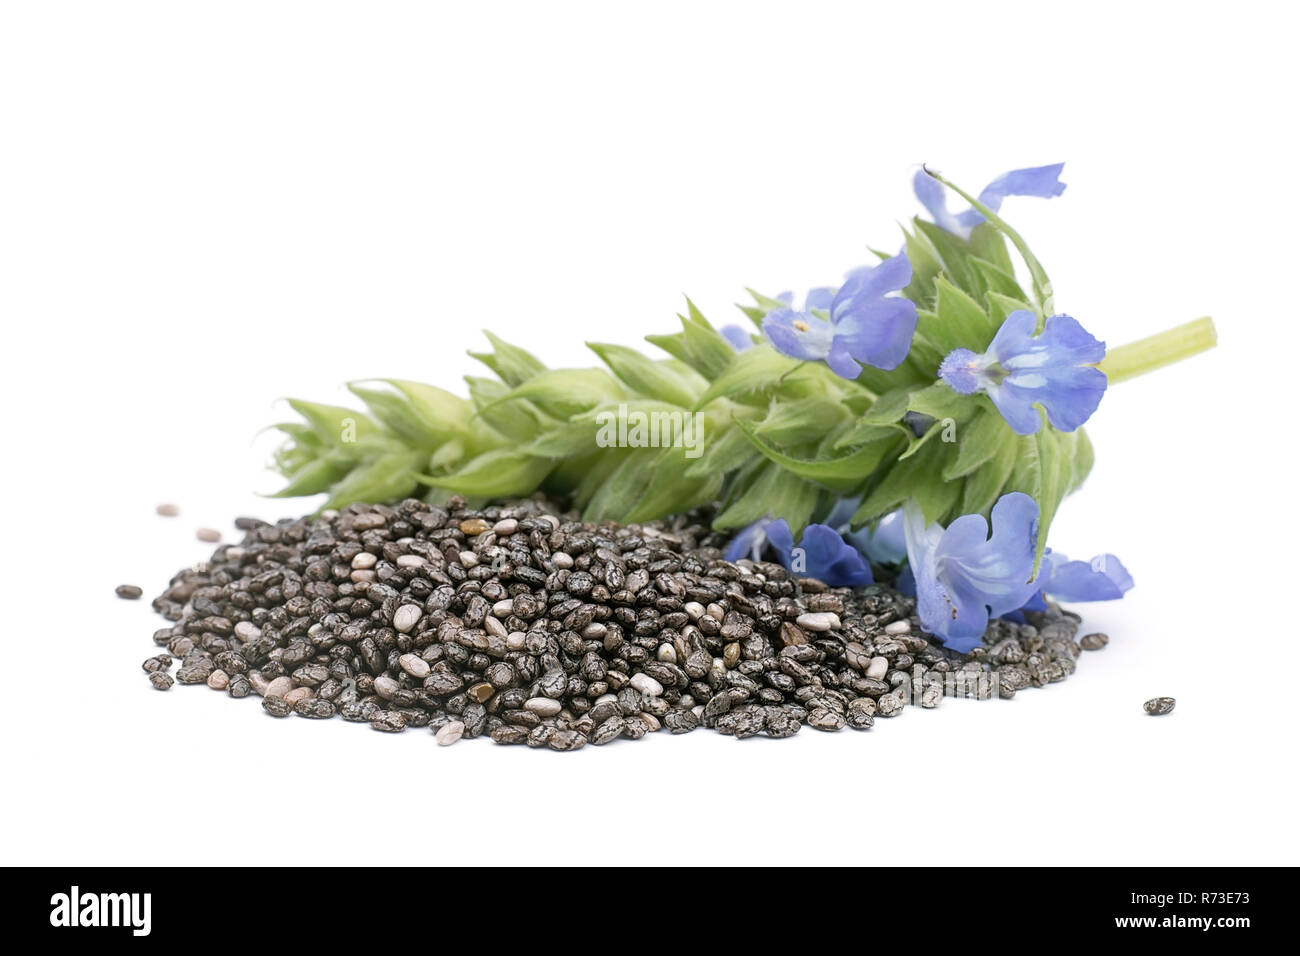 (Salvia hispanica) Pile of seeds with flowers on white background Stock Photo -